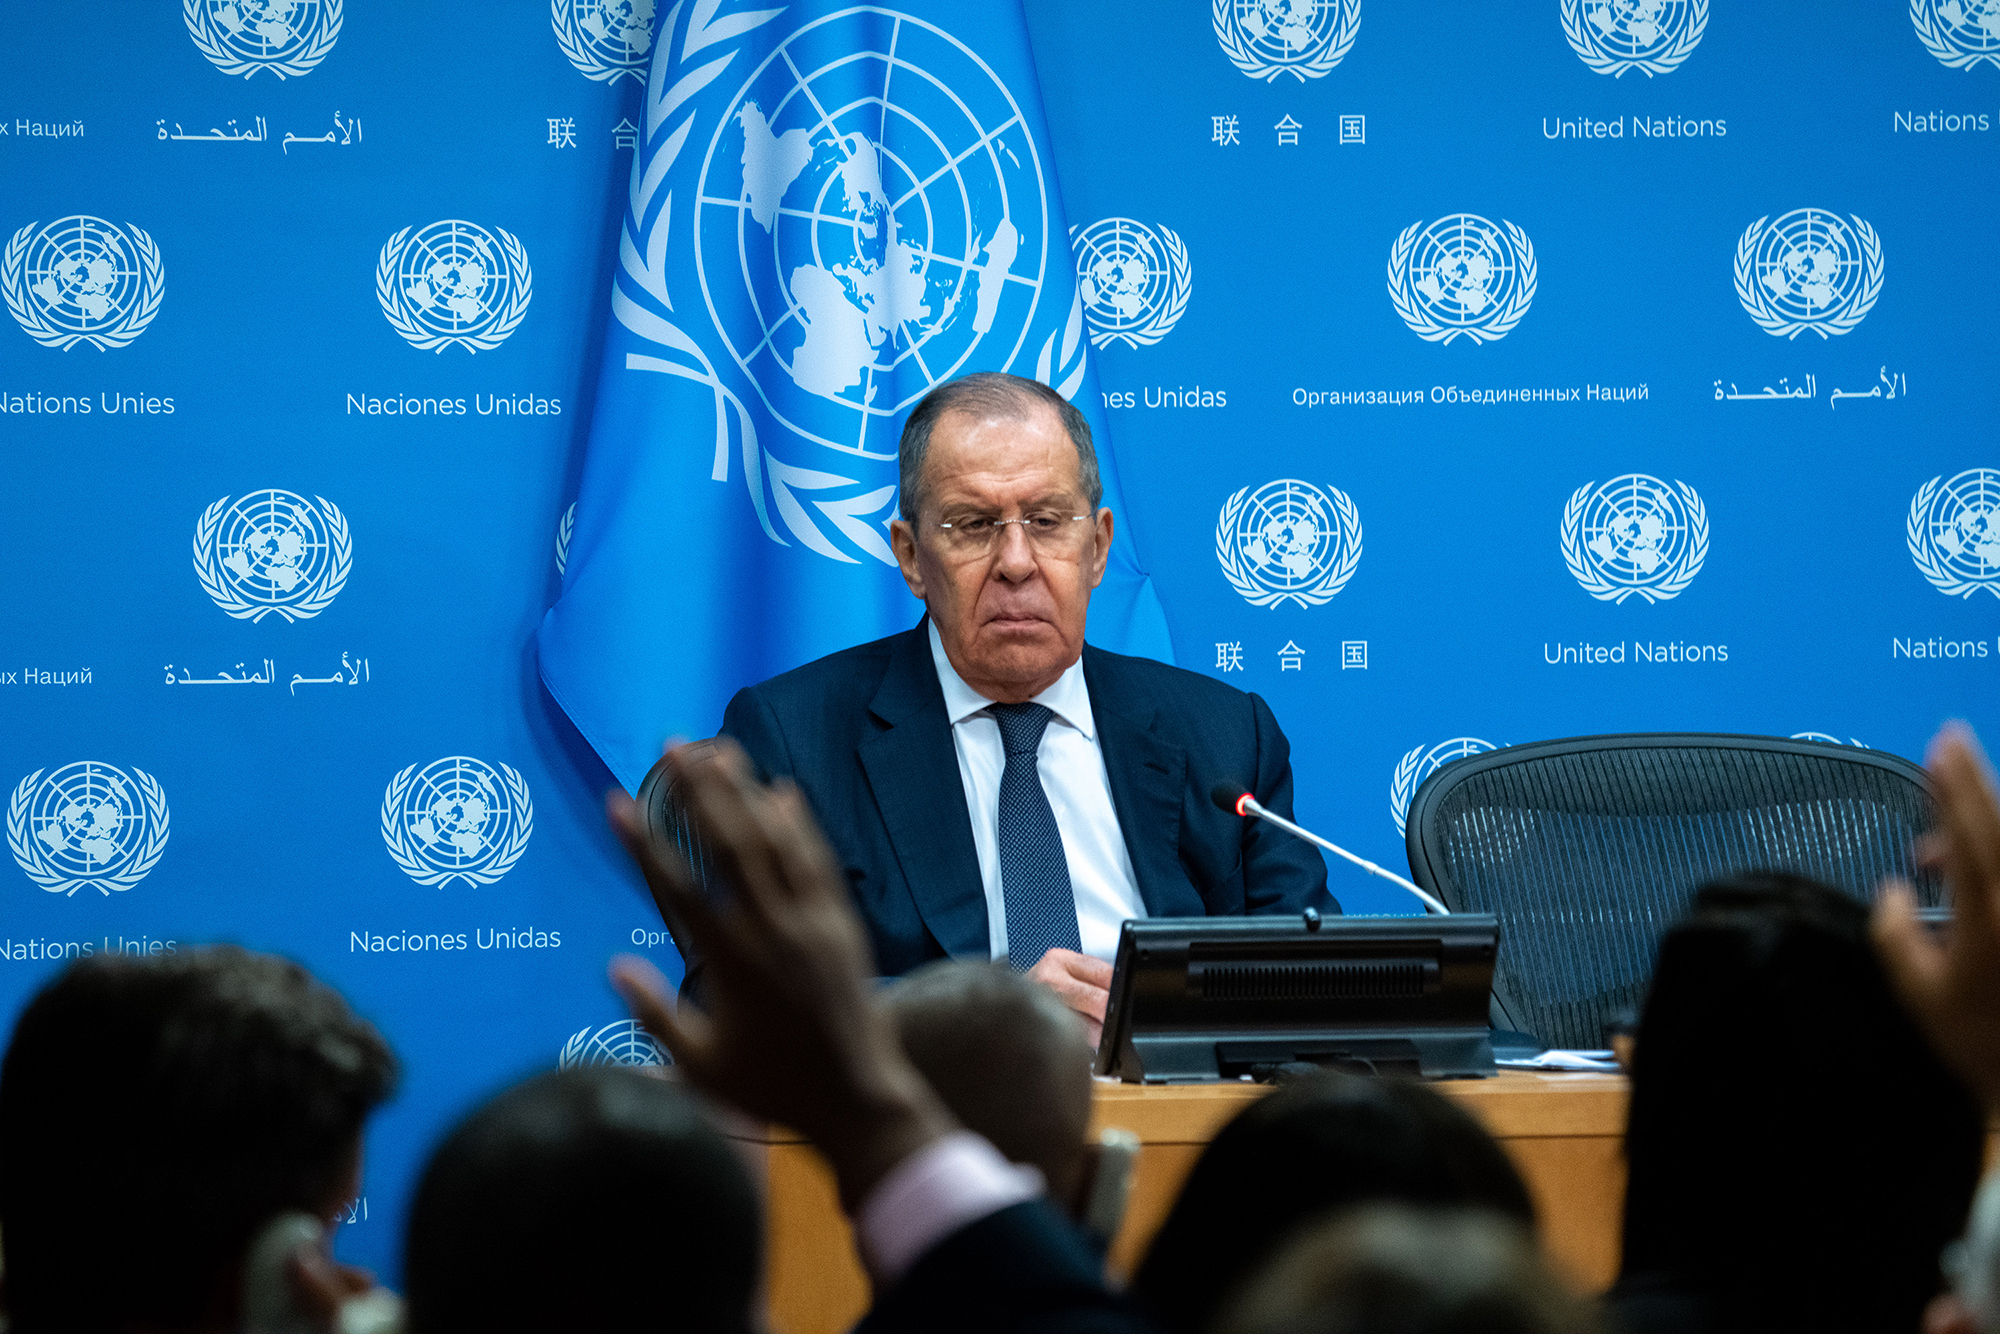 Russian Foreign Minister Sergey Lavrov holds a press conference during the United Nations General Assembly on September 23 in New York City. 